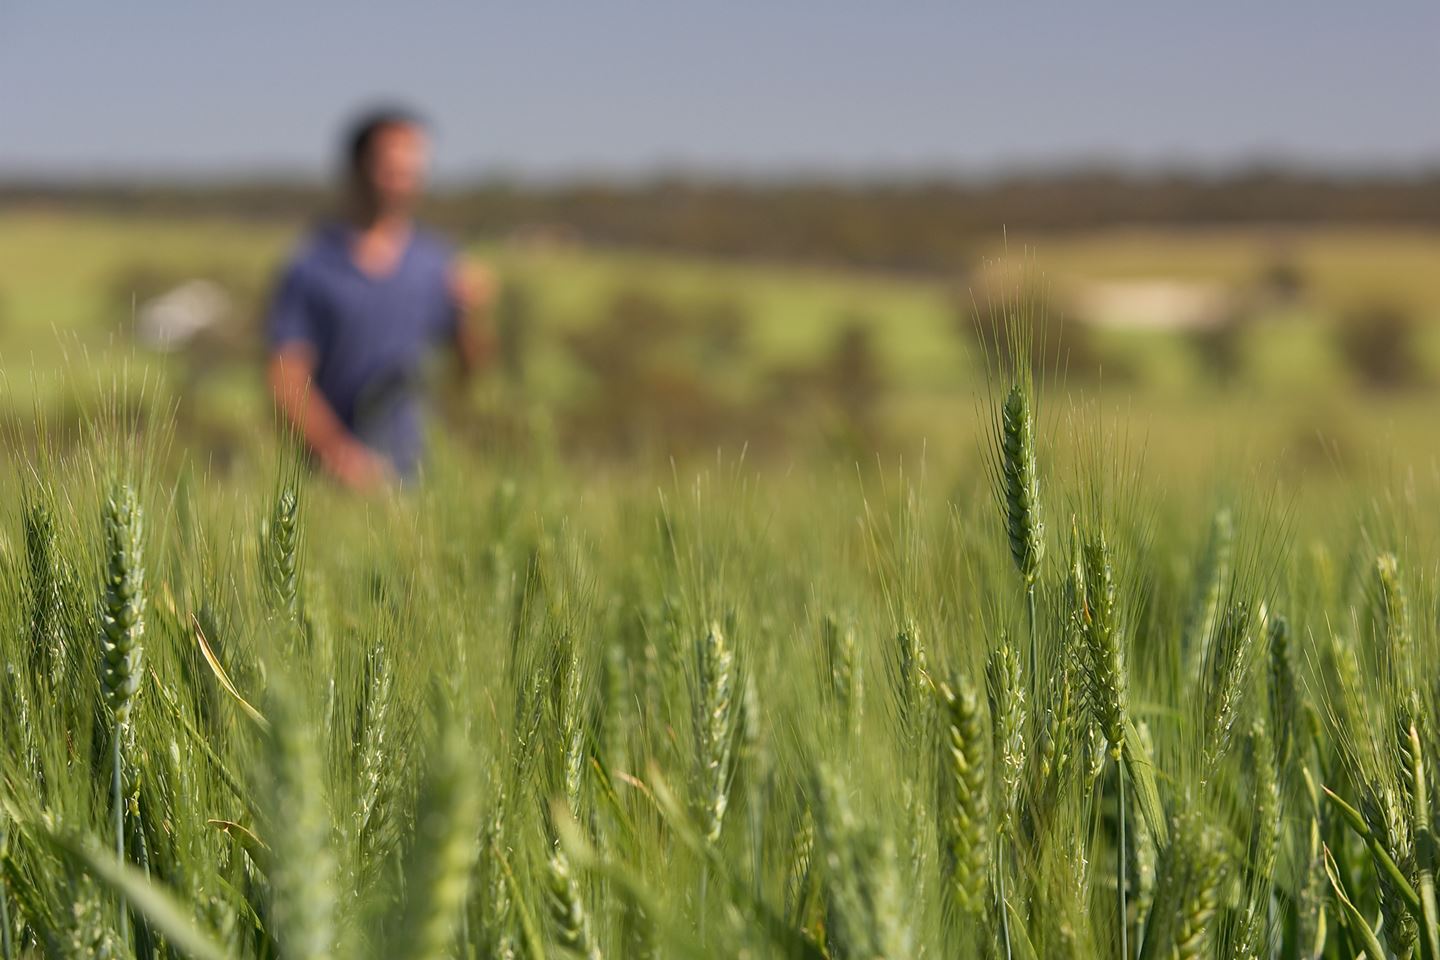 A person is blurred in the background standing in a paddock of barley